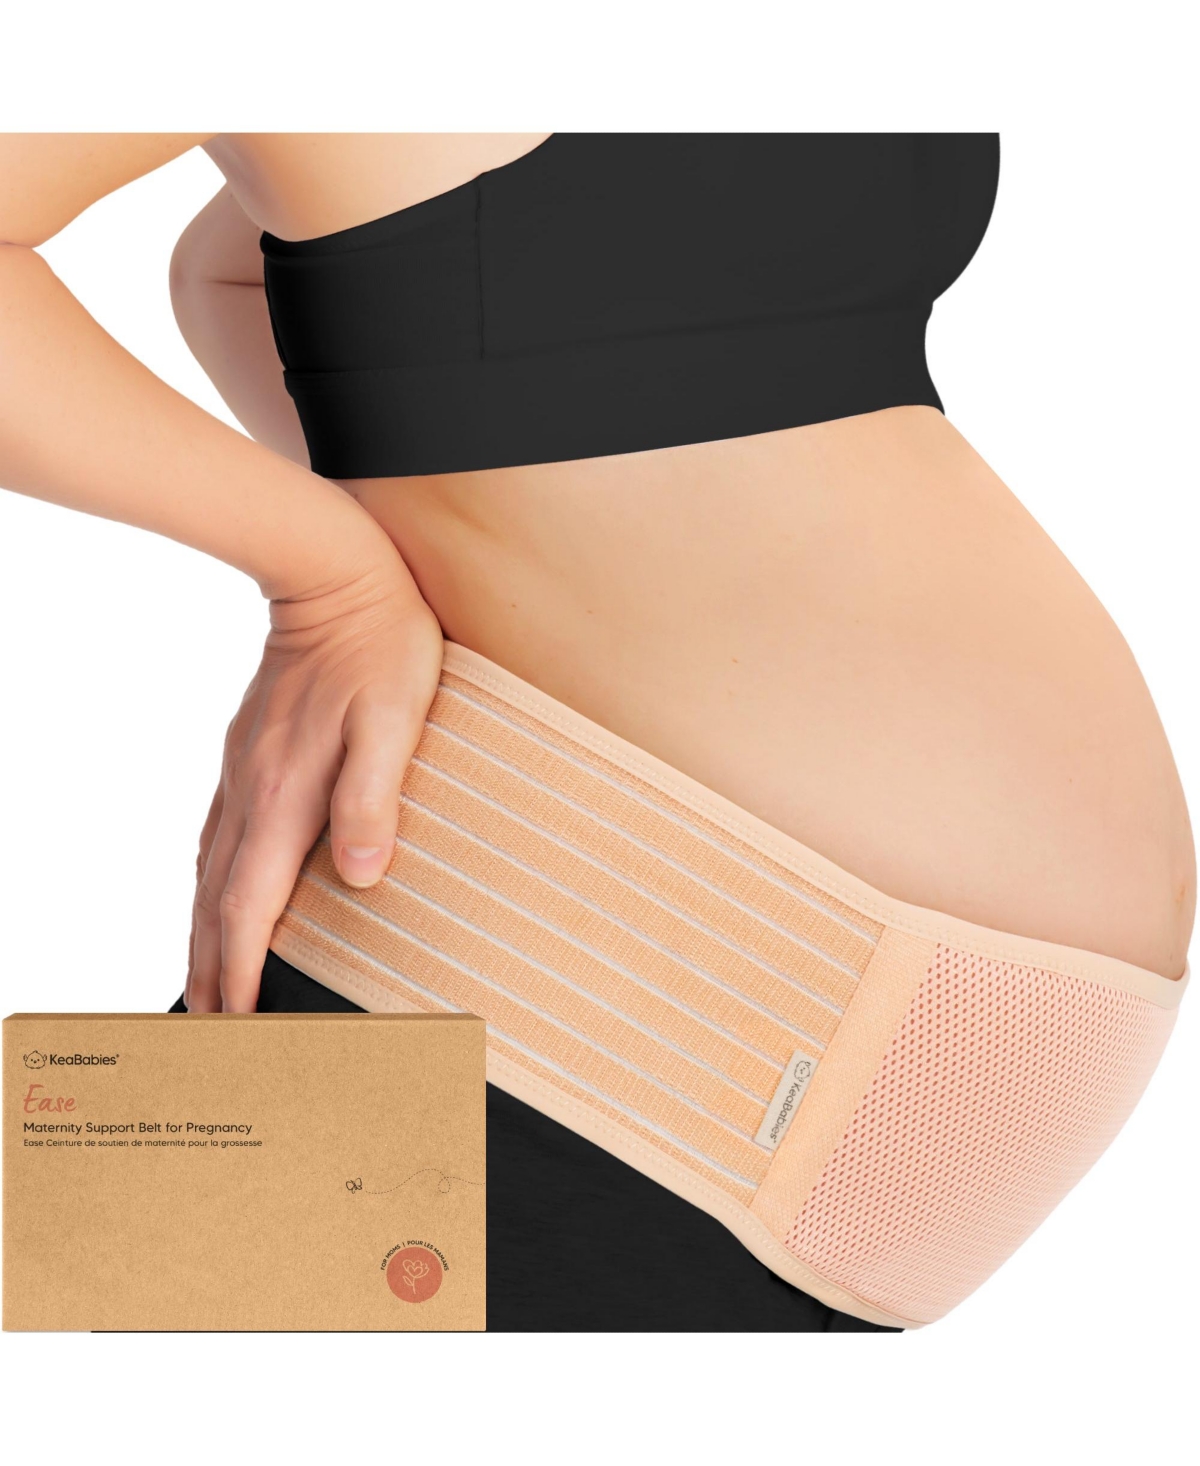 Maternity Belly Band for Pregnancy, Soft & Breathable Pregnancy Belly Support Belt - Midnight black